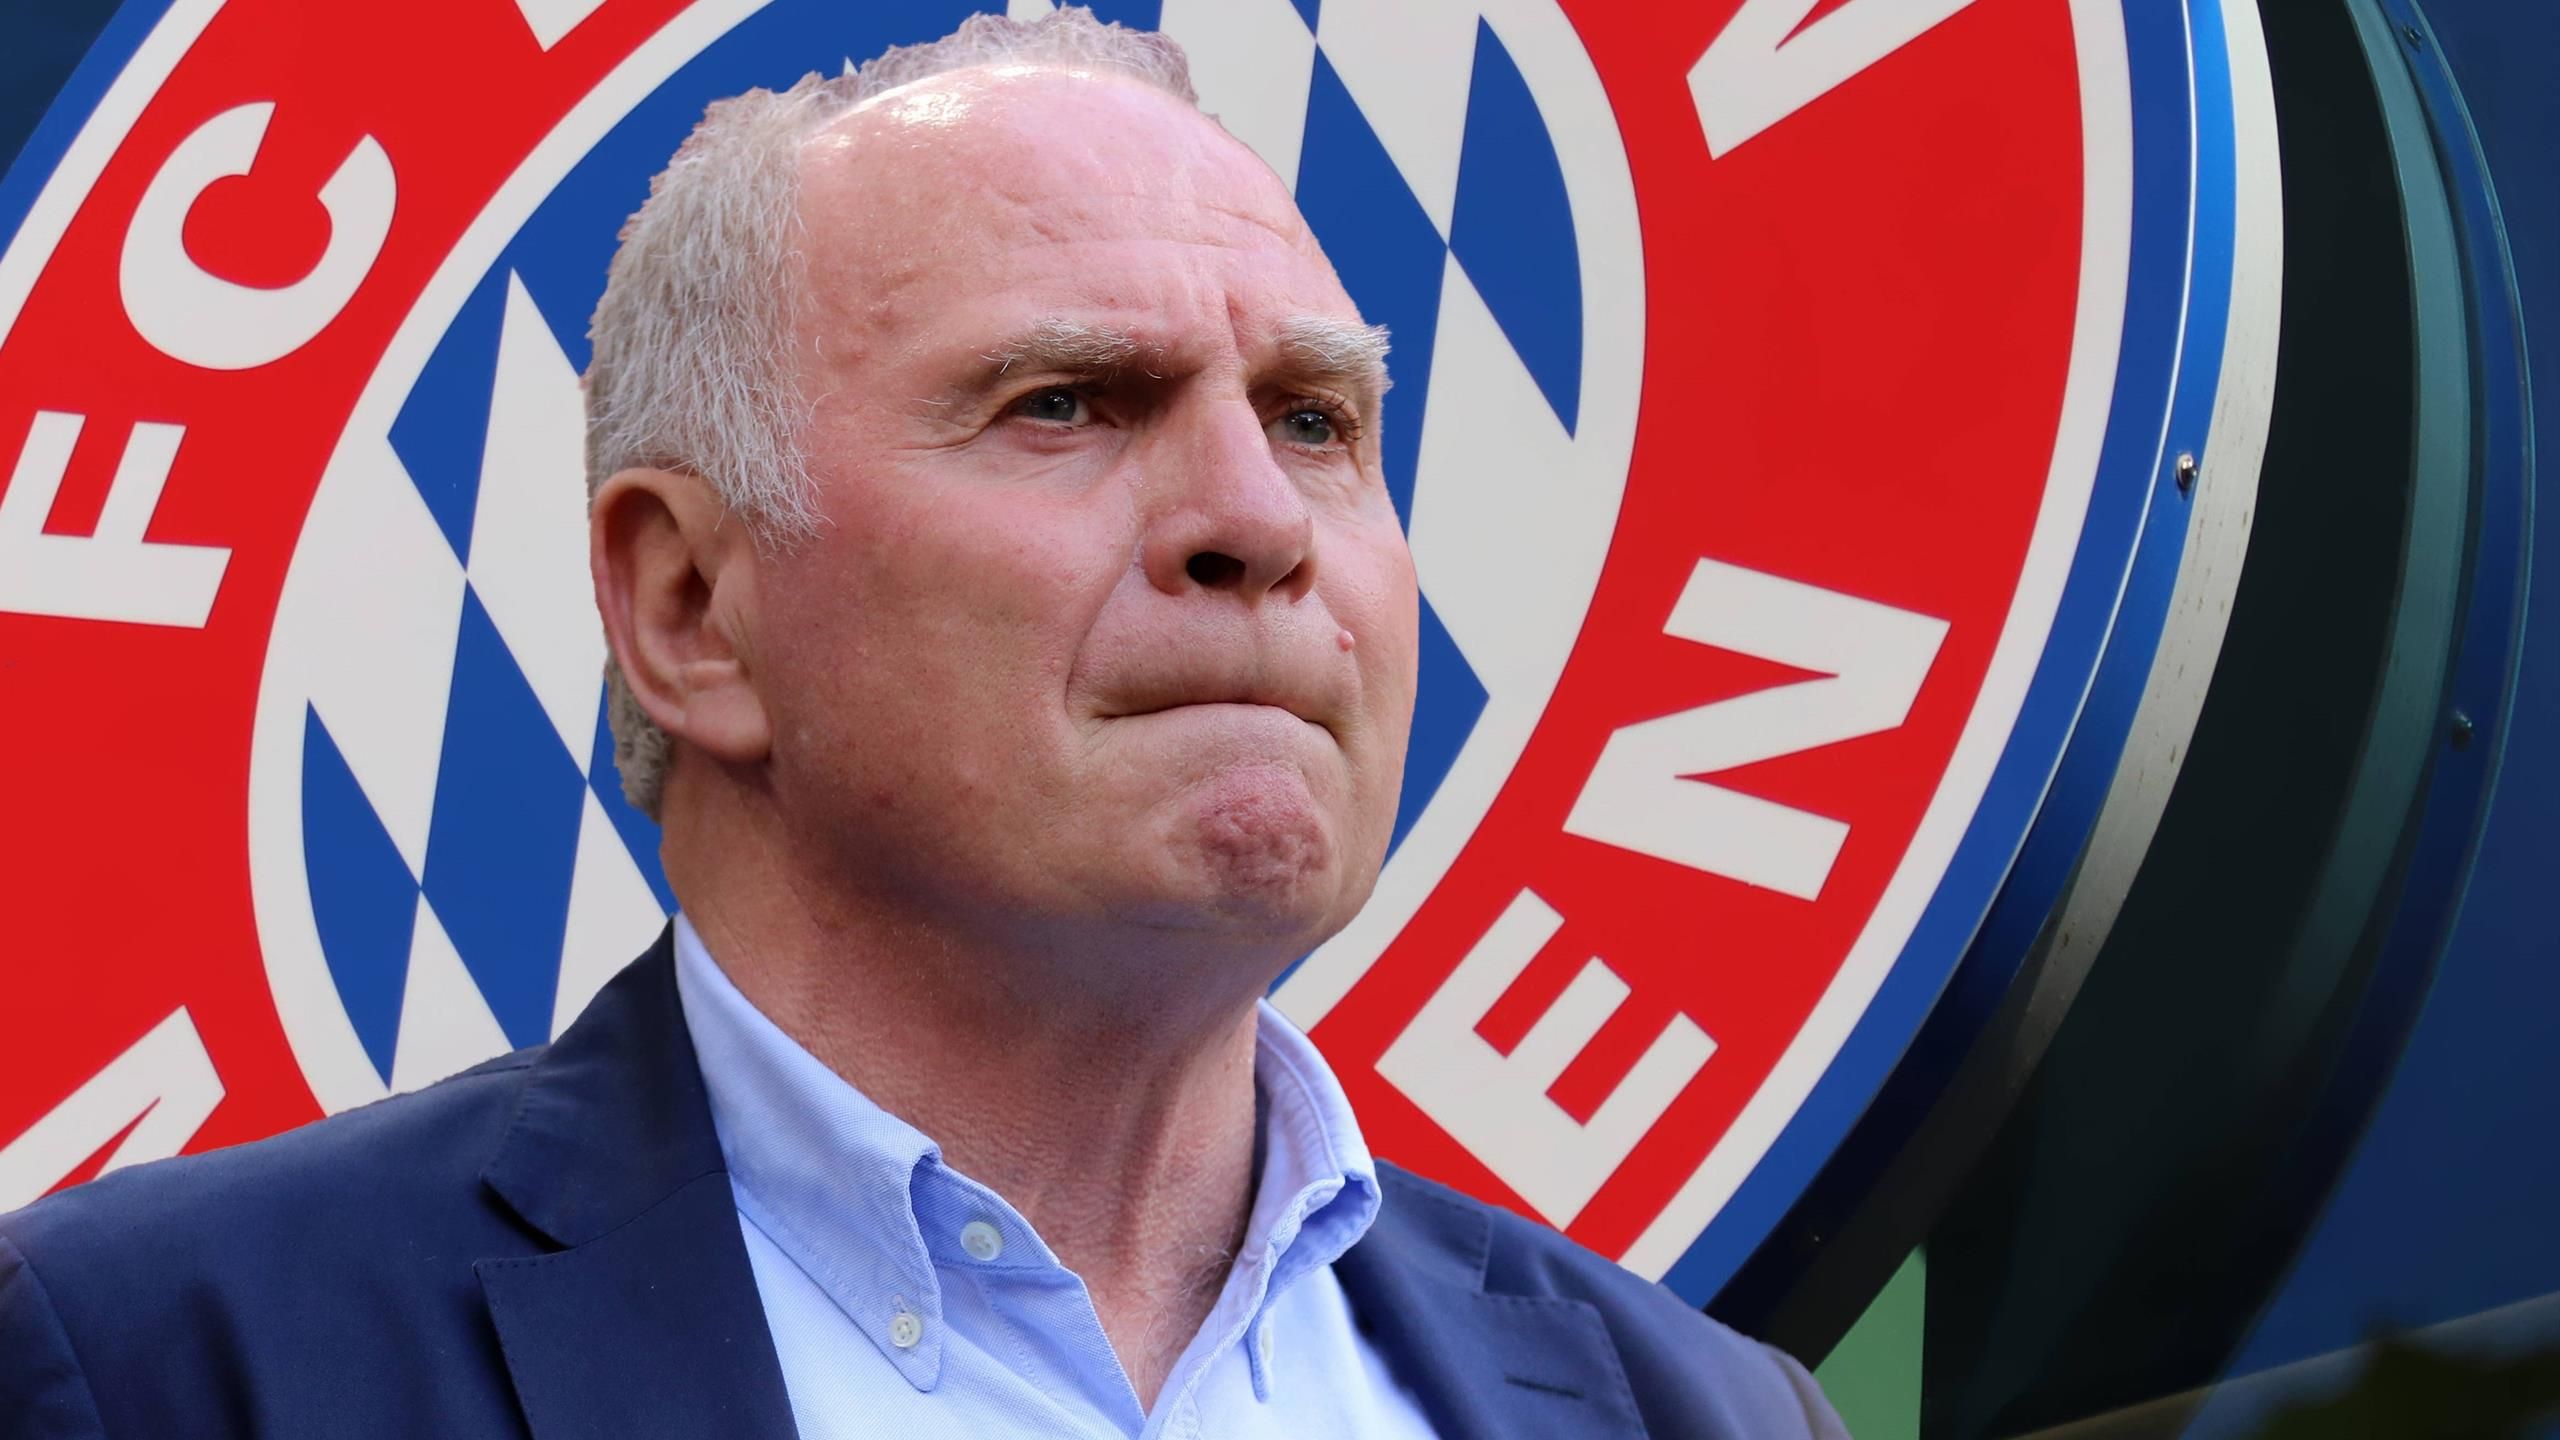 Fc Bayern Uli Hoeneß With An All Round Strike Against Oliver Kahn And The Greens The Return 